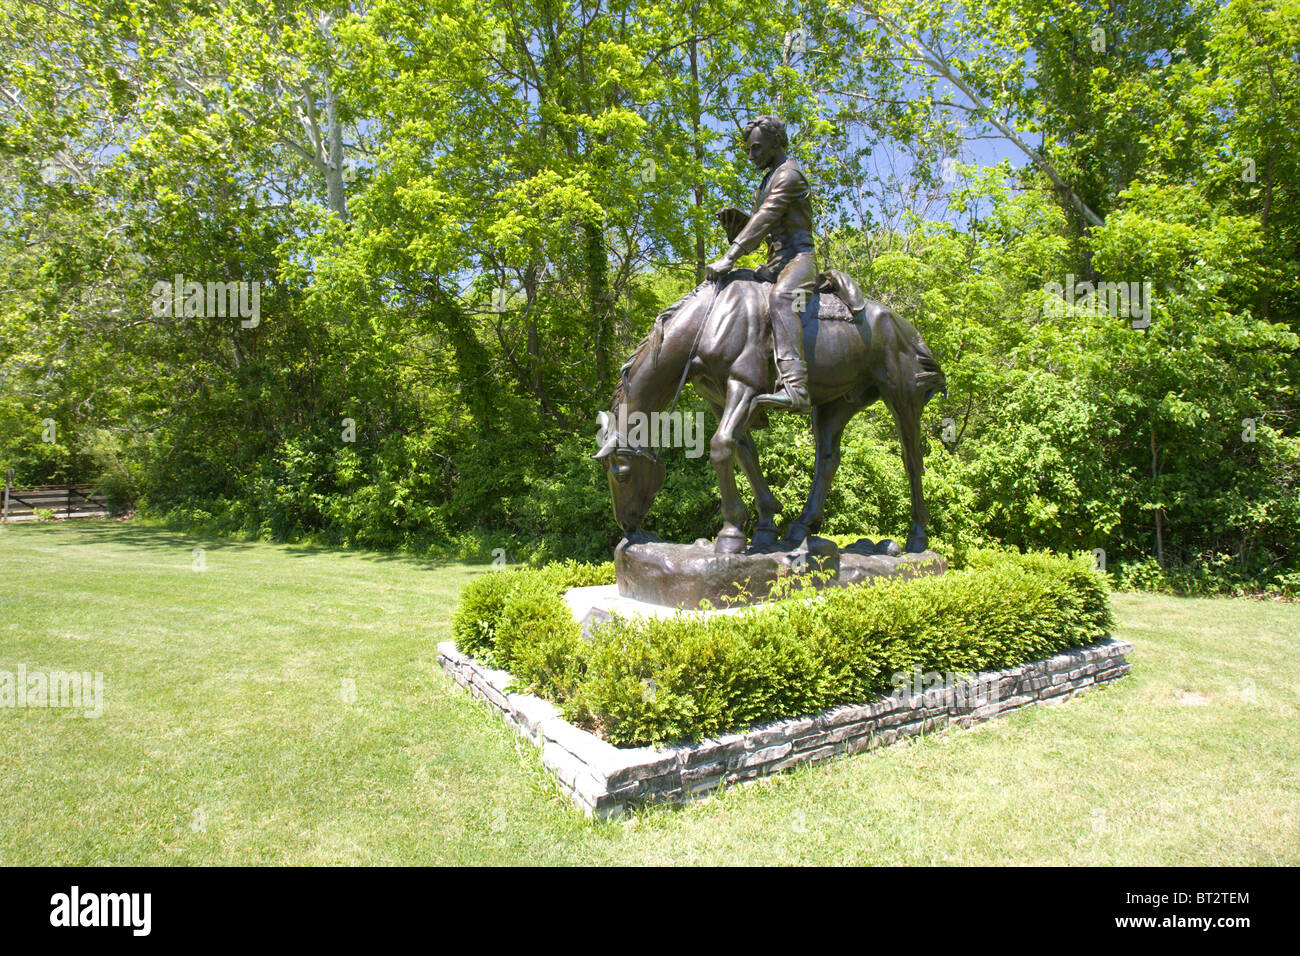 Statue Of Abraham Lincoln Riding A Horse On The Prairie In New